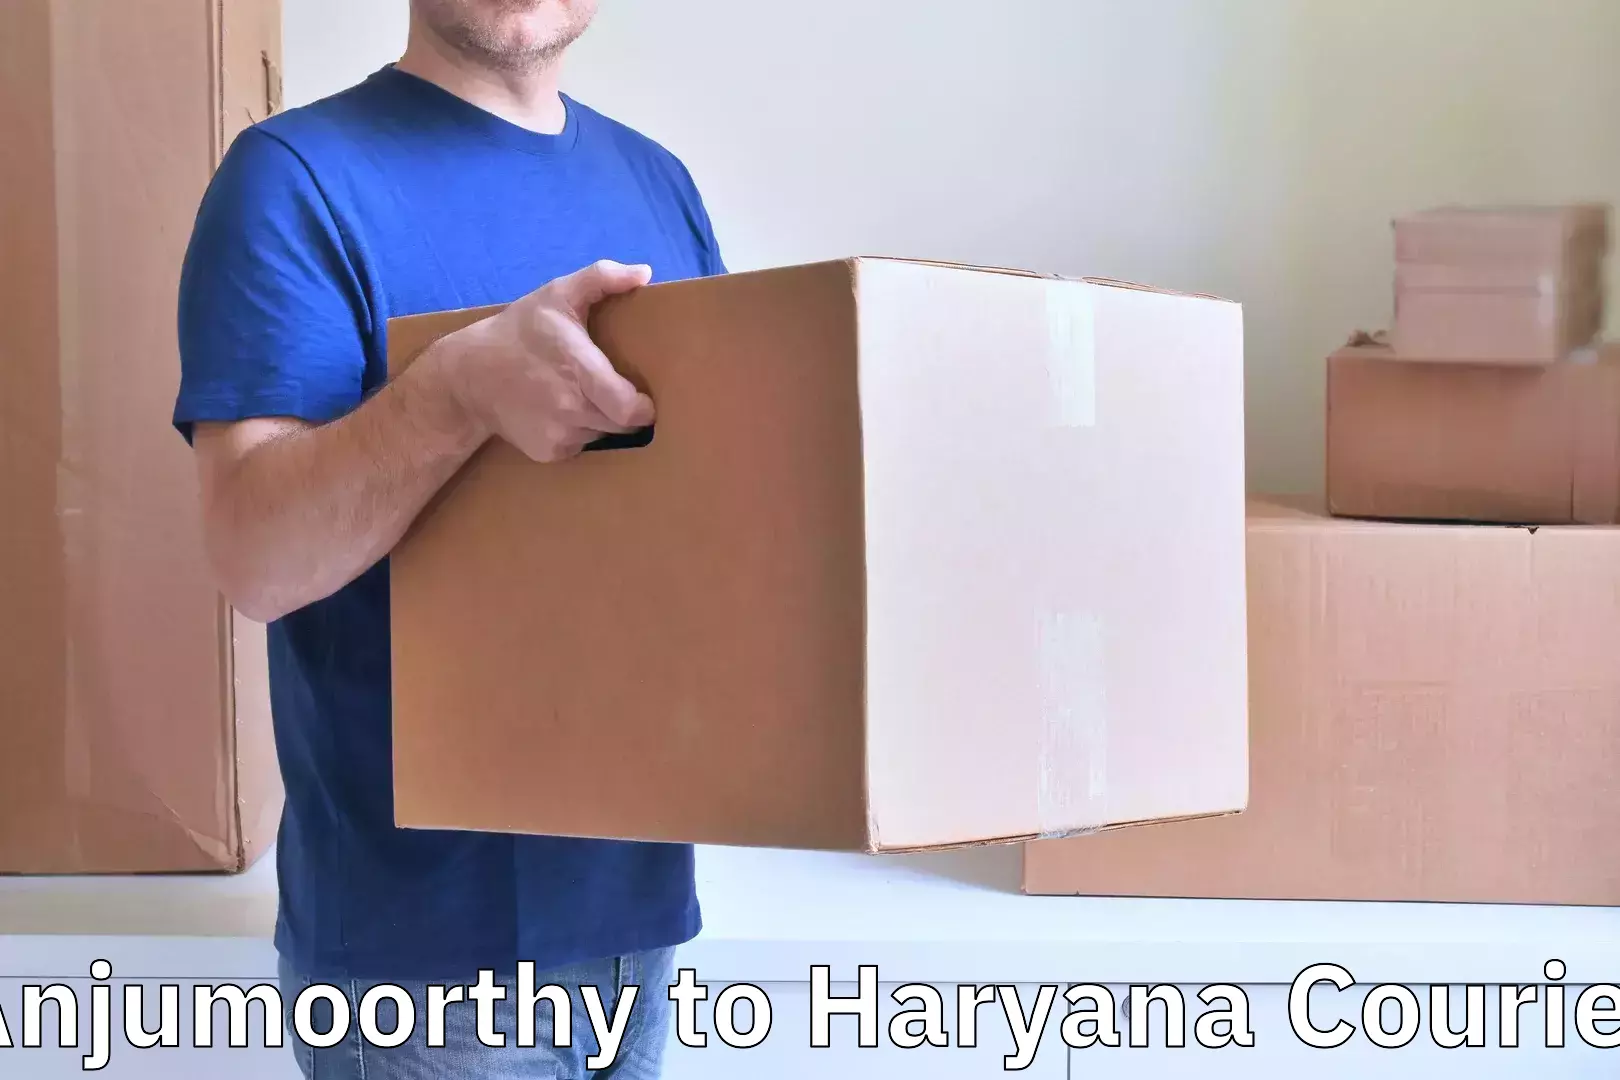 Express luggage delivery Anjumoorthy to Gurgaon